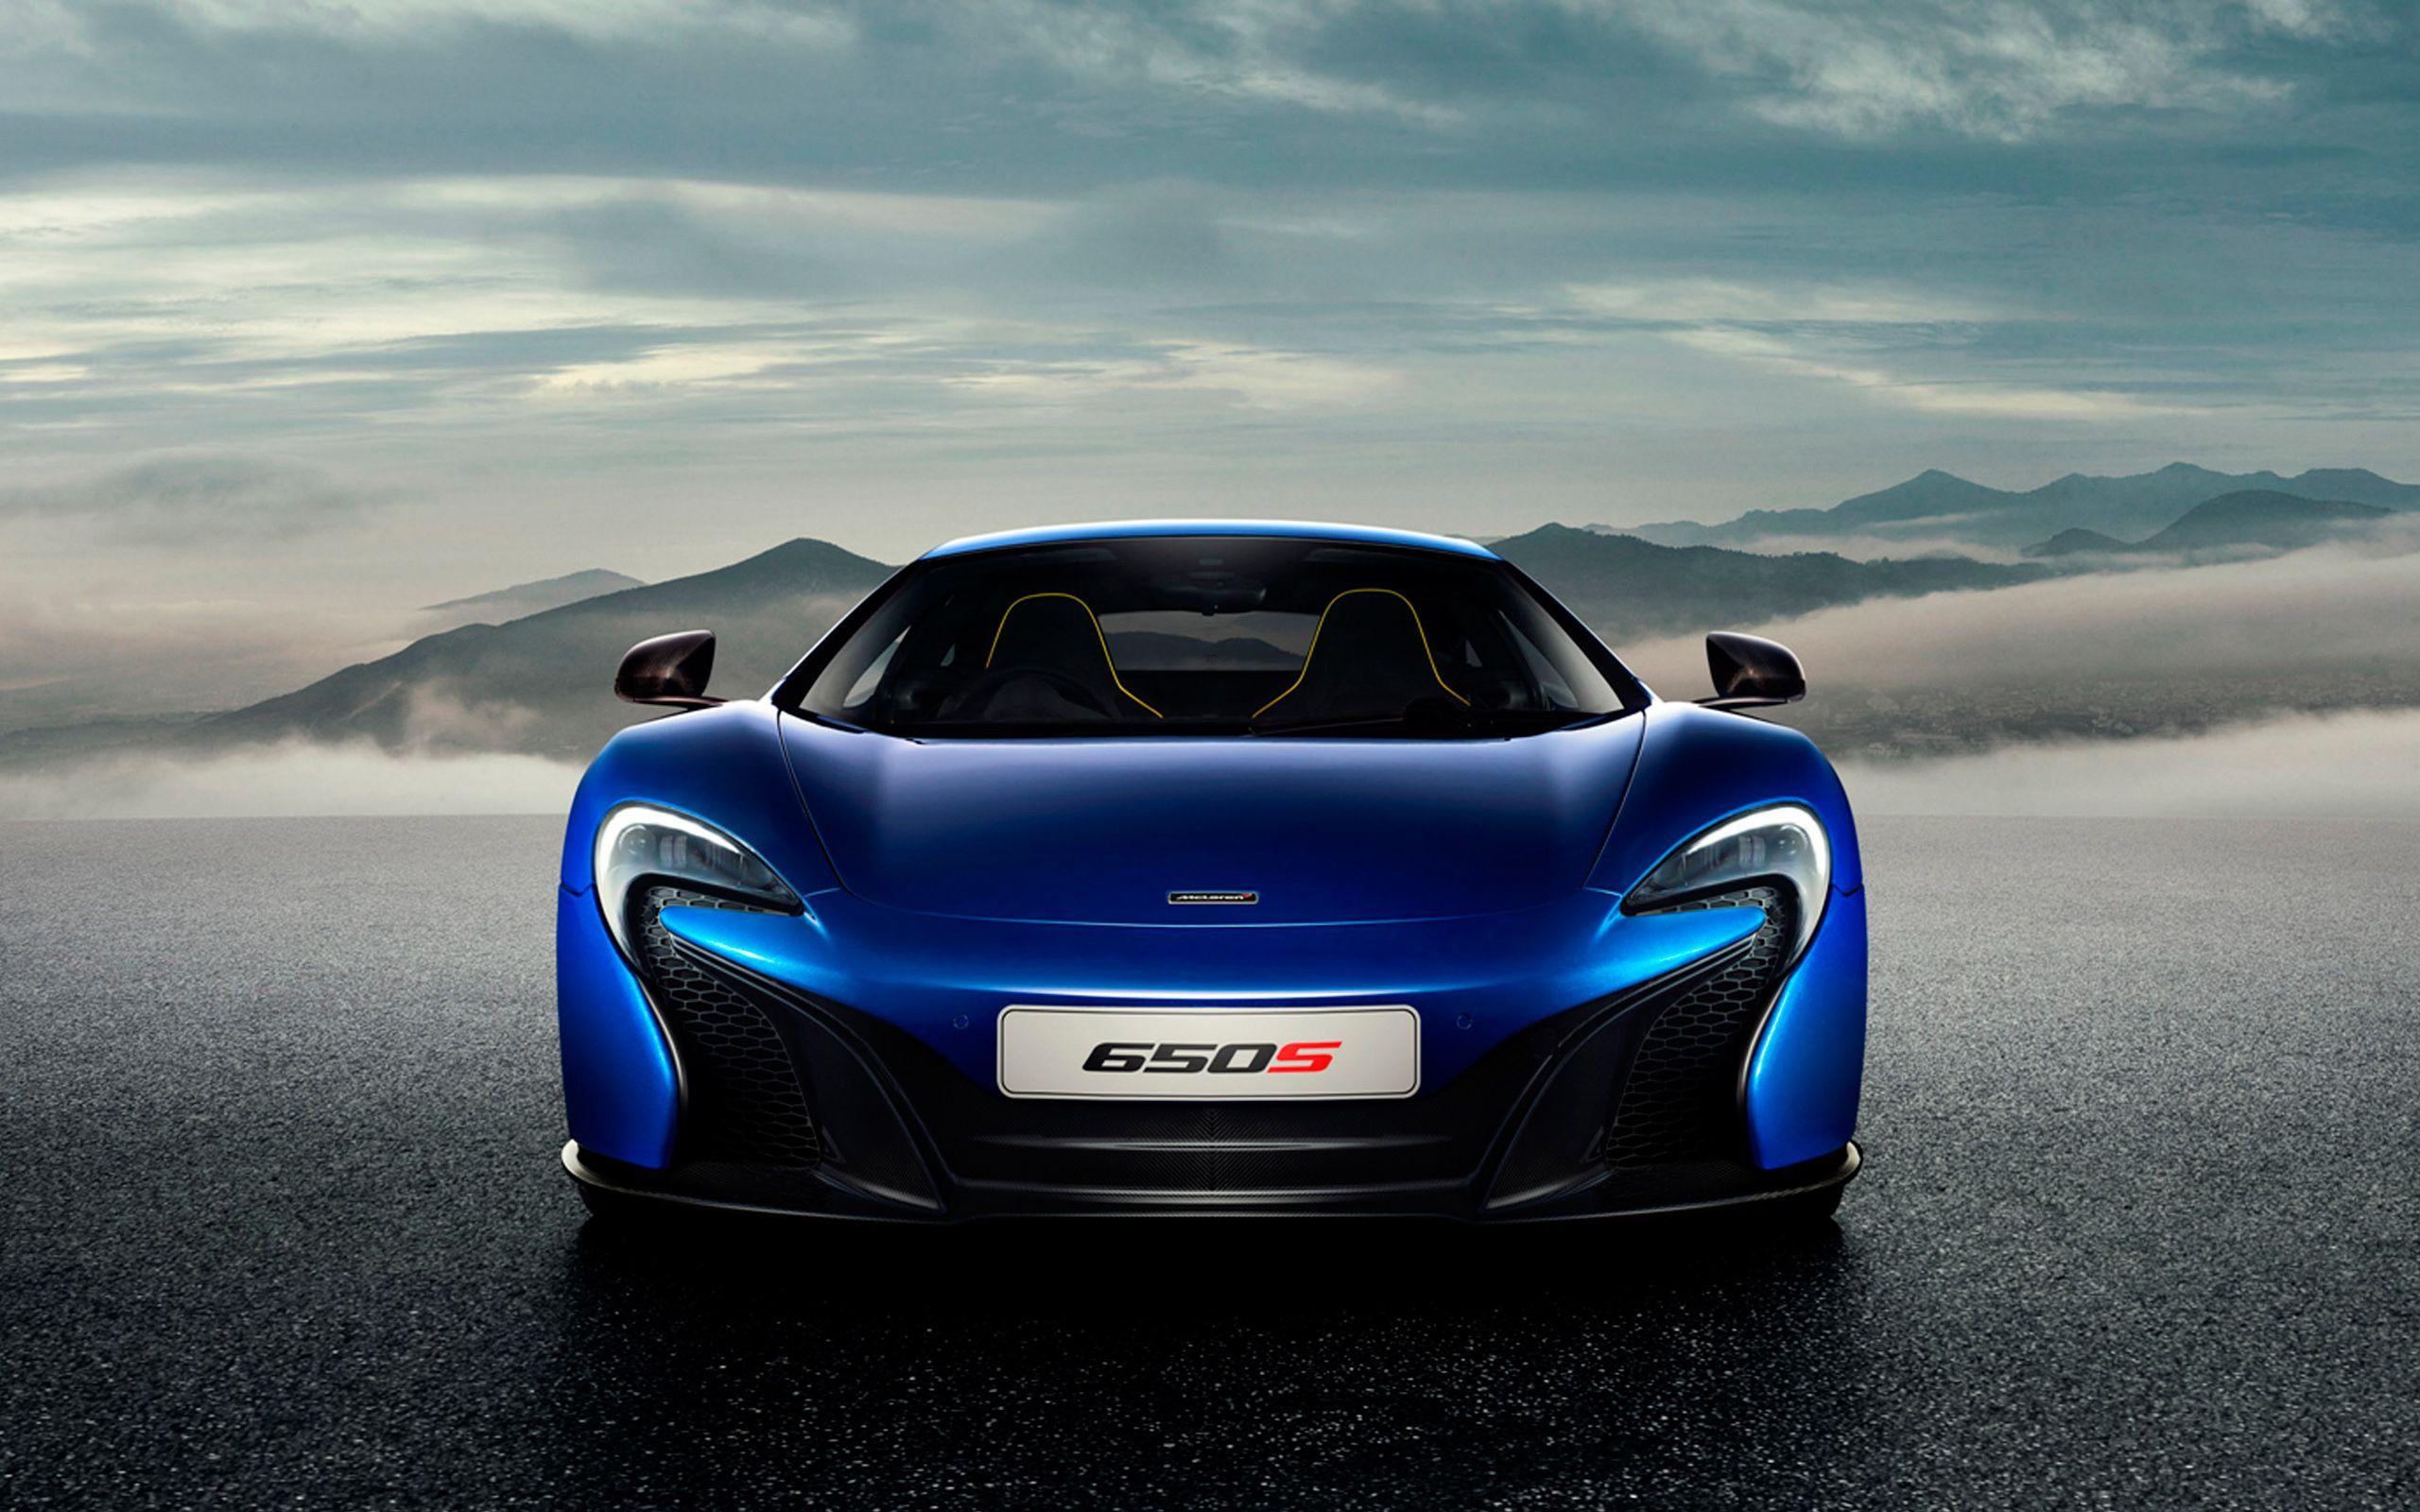 McLaren 650S Wallpaper High Resolution and Quality Download